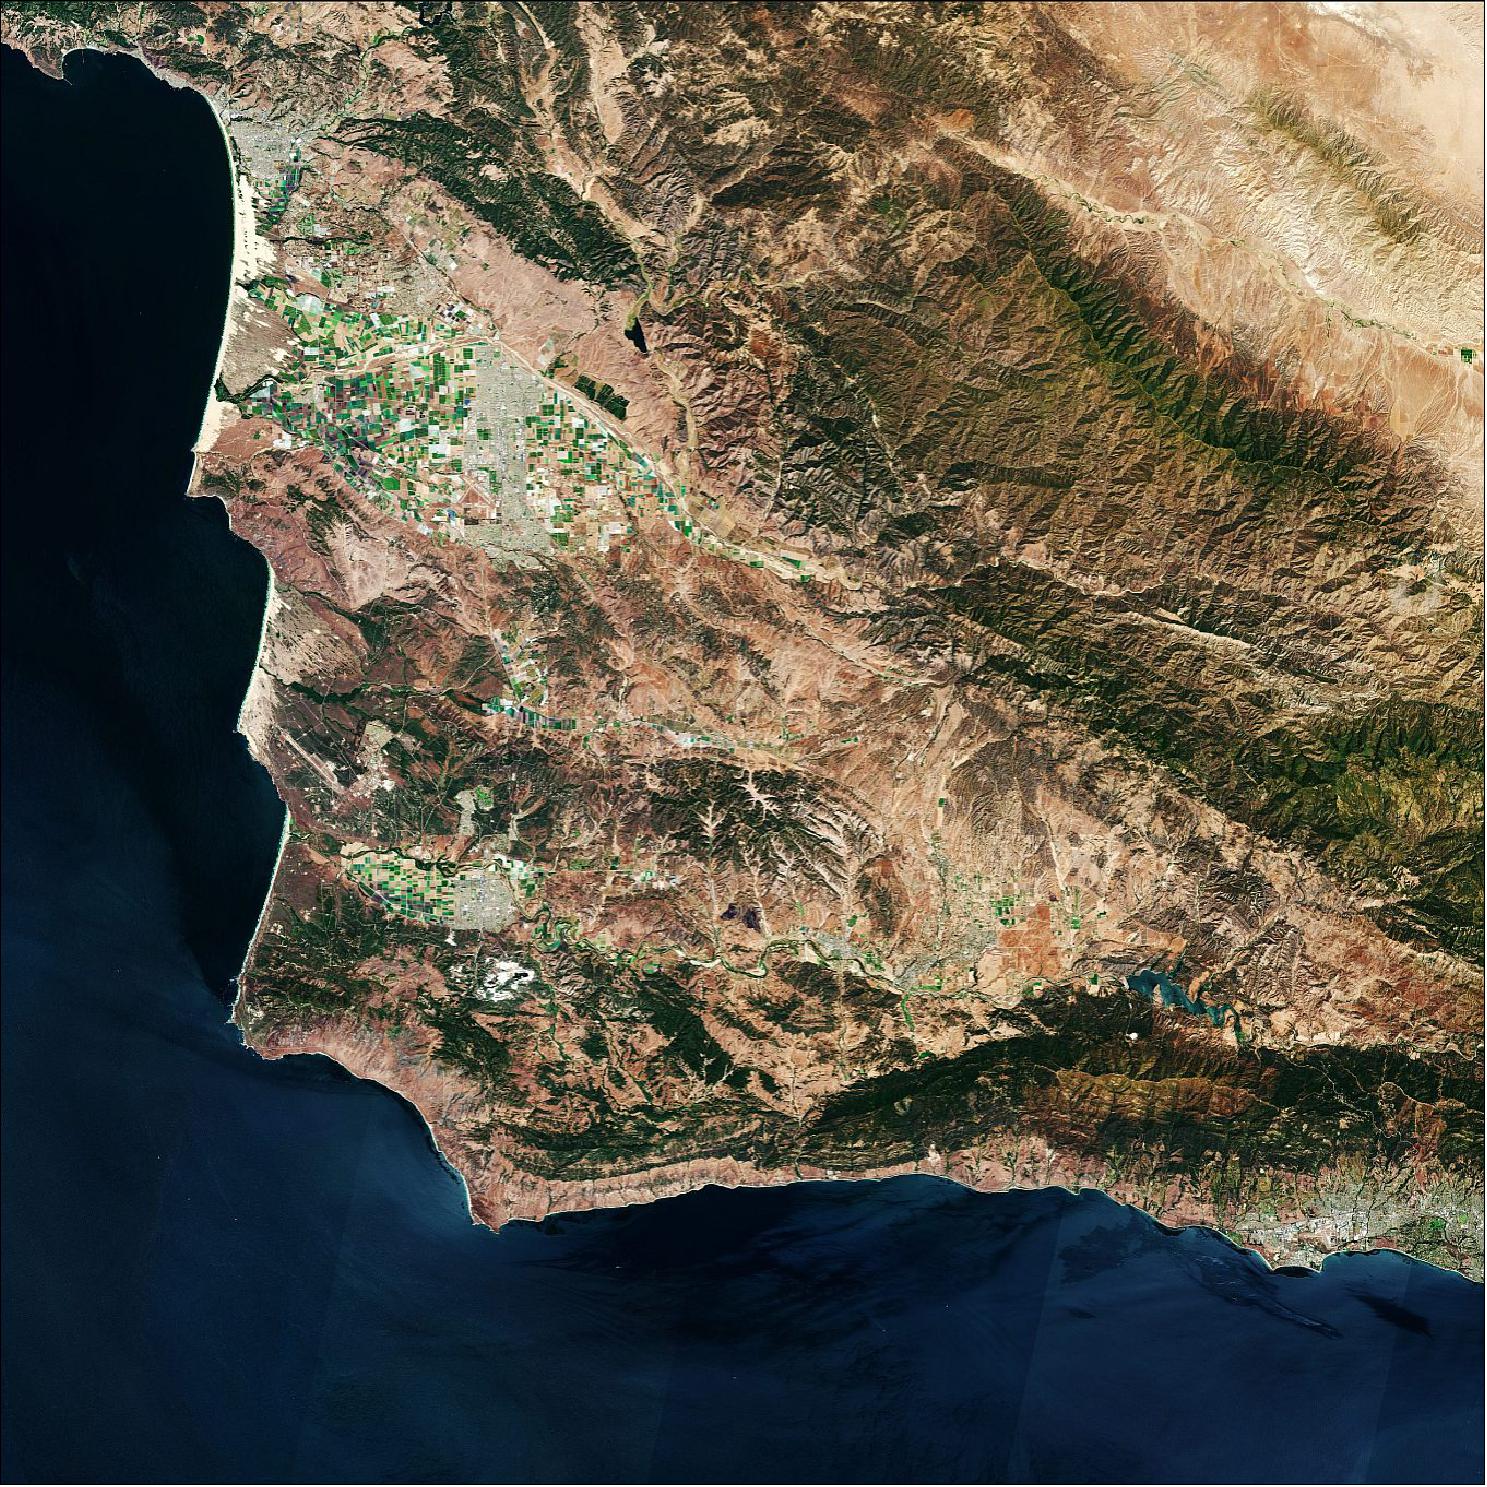 Figure 4: The area pictured here shows the Santa Barbara County in the southern region of the US state of California. Located around 200 km northwest of Los Angeles, the county spans across 7,000 km2 and is bordered by the Pacific Ocean to the west and south. This image, captured on 14 August 2020, is also featured on the Earth from Space video program (image credit: ESA, the image contains modified Copernicus Sentinel data (2020), processed by ESA, CC BY-SA 3.0 IGO)